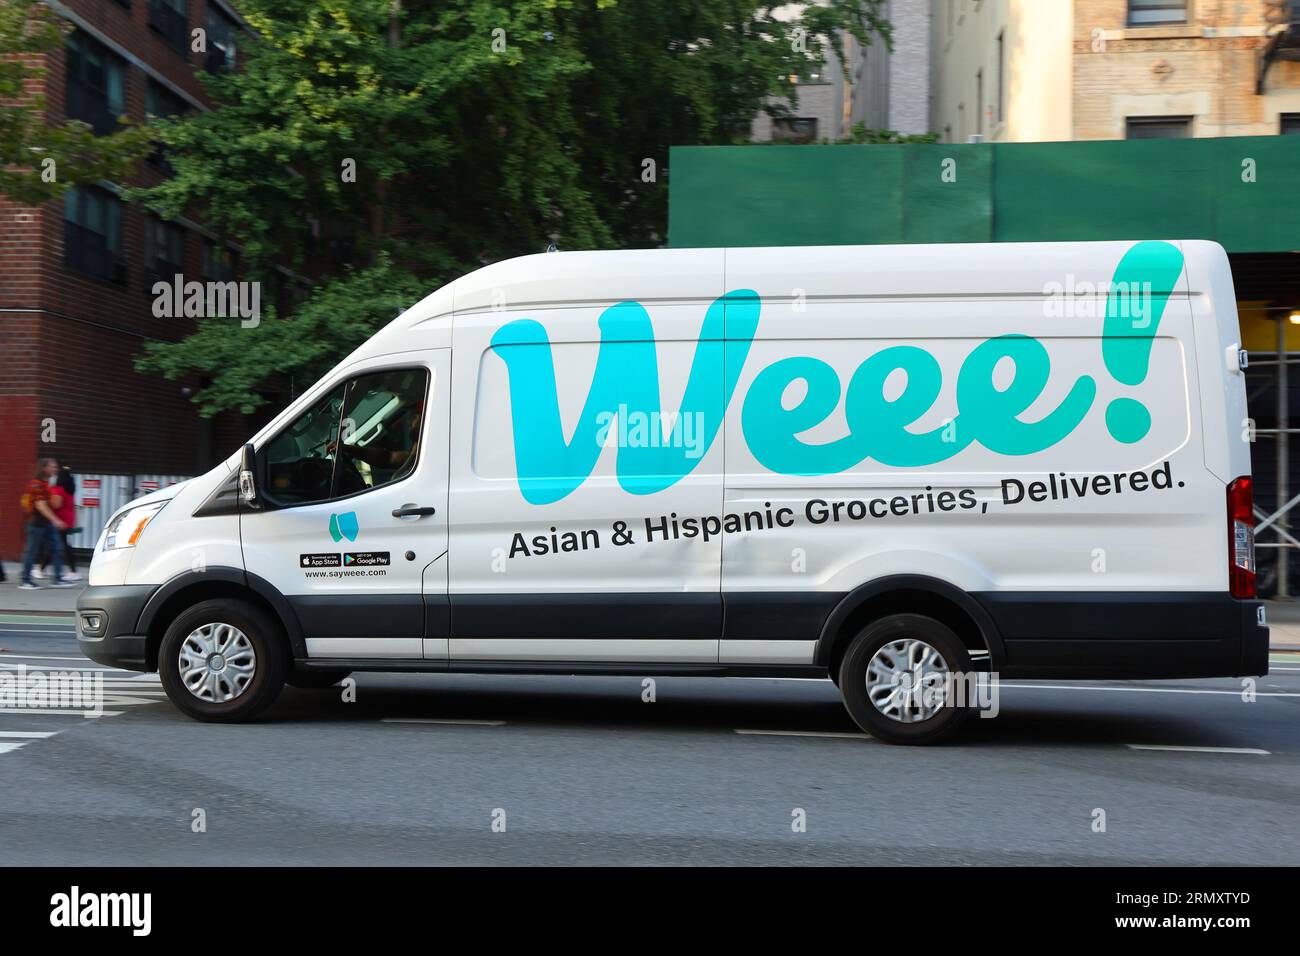 A Weee! Asian and Hispanic grocery delivery van in New York City. The online e-grocer focuses on Asian, Latino, and Hispanic food products. Stock Photo